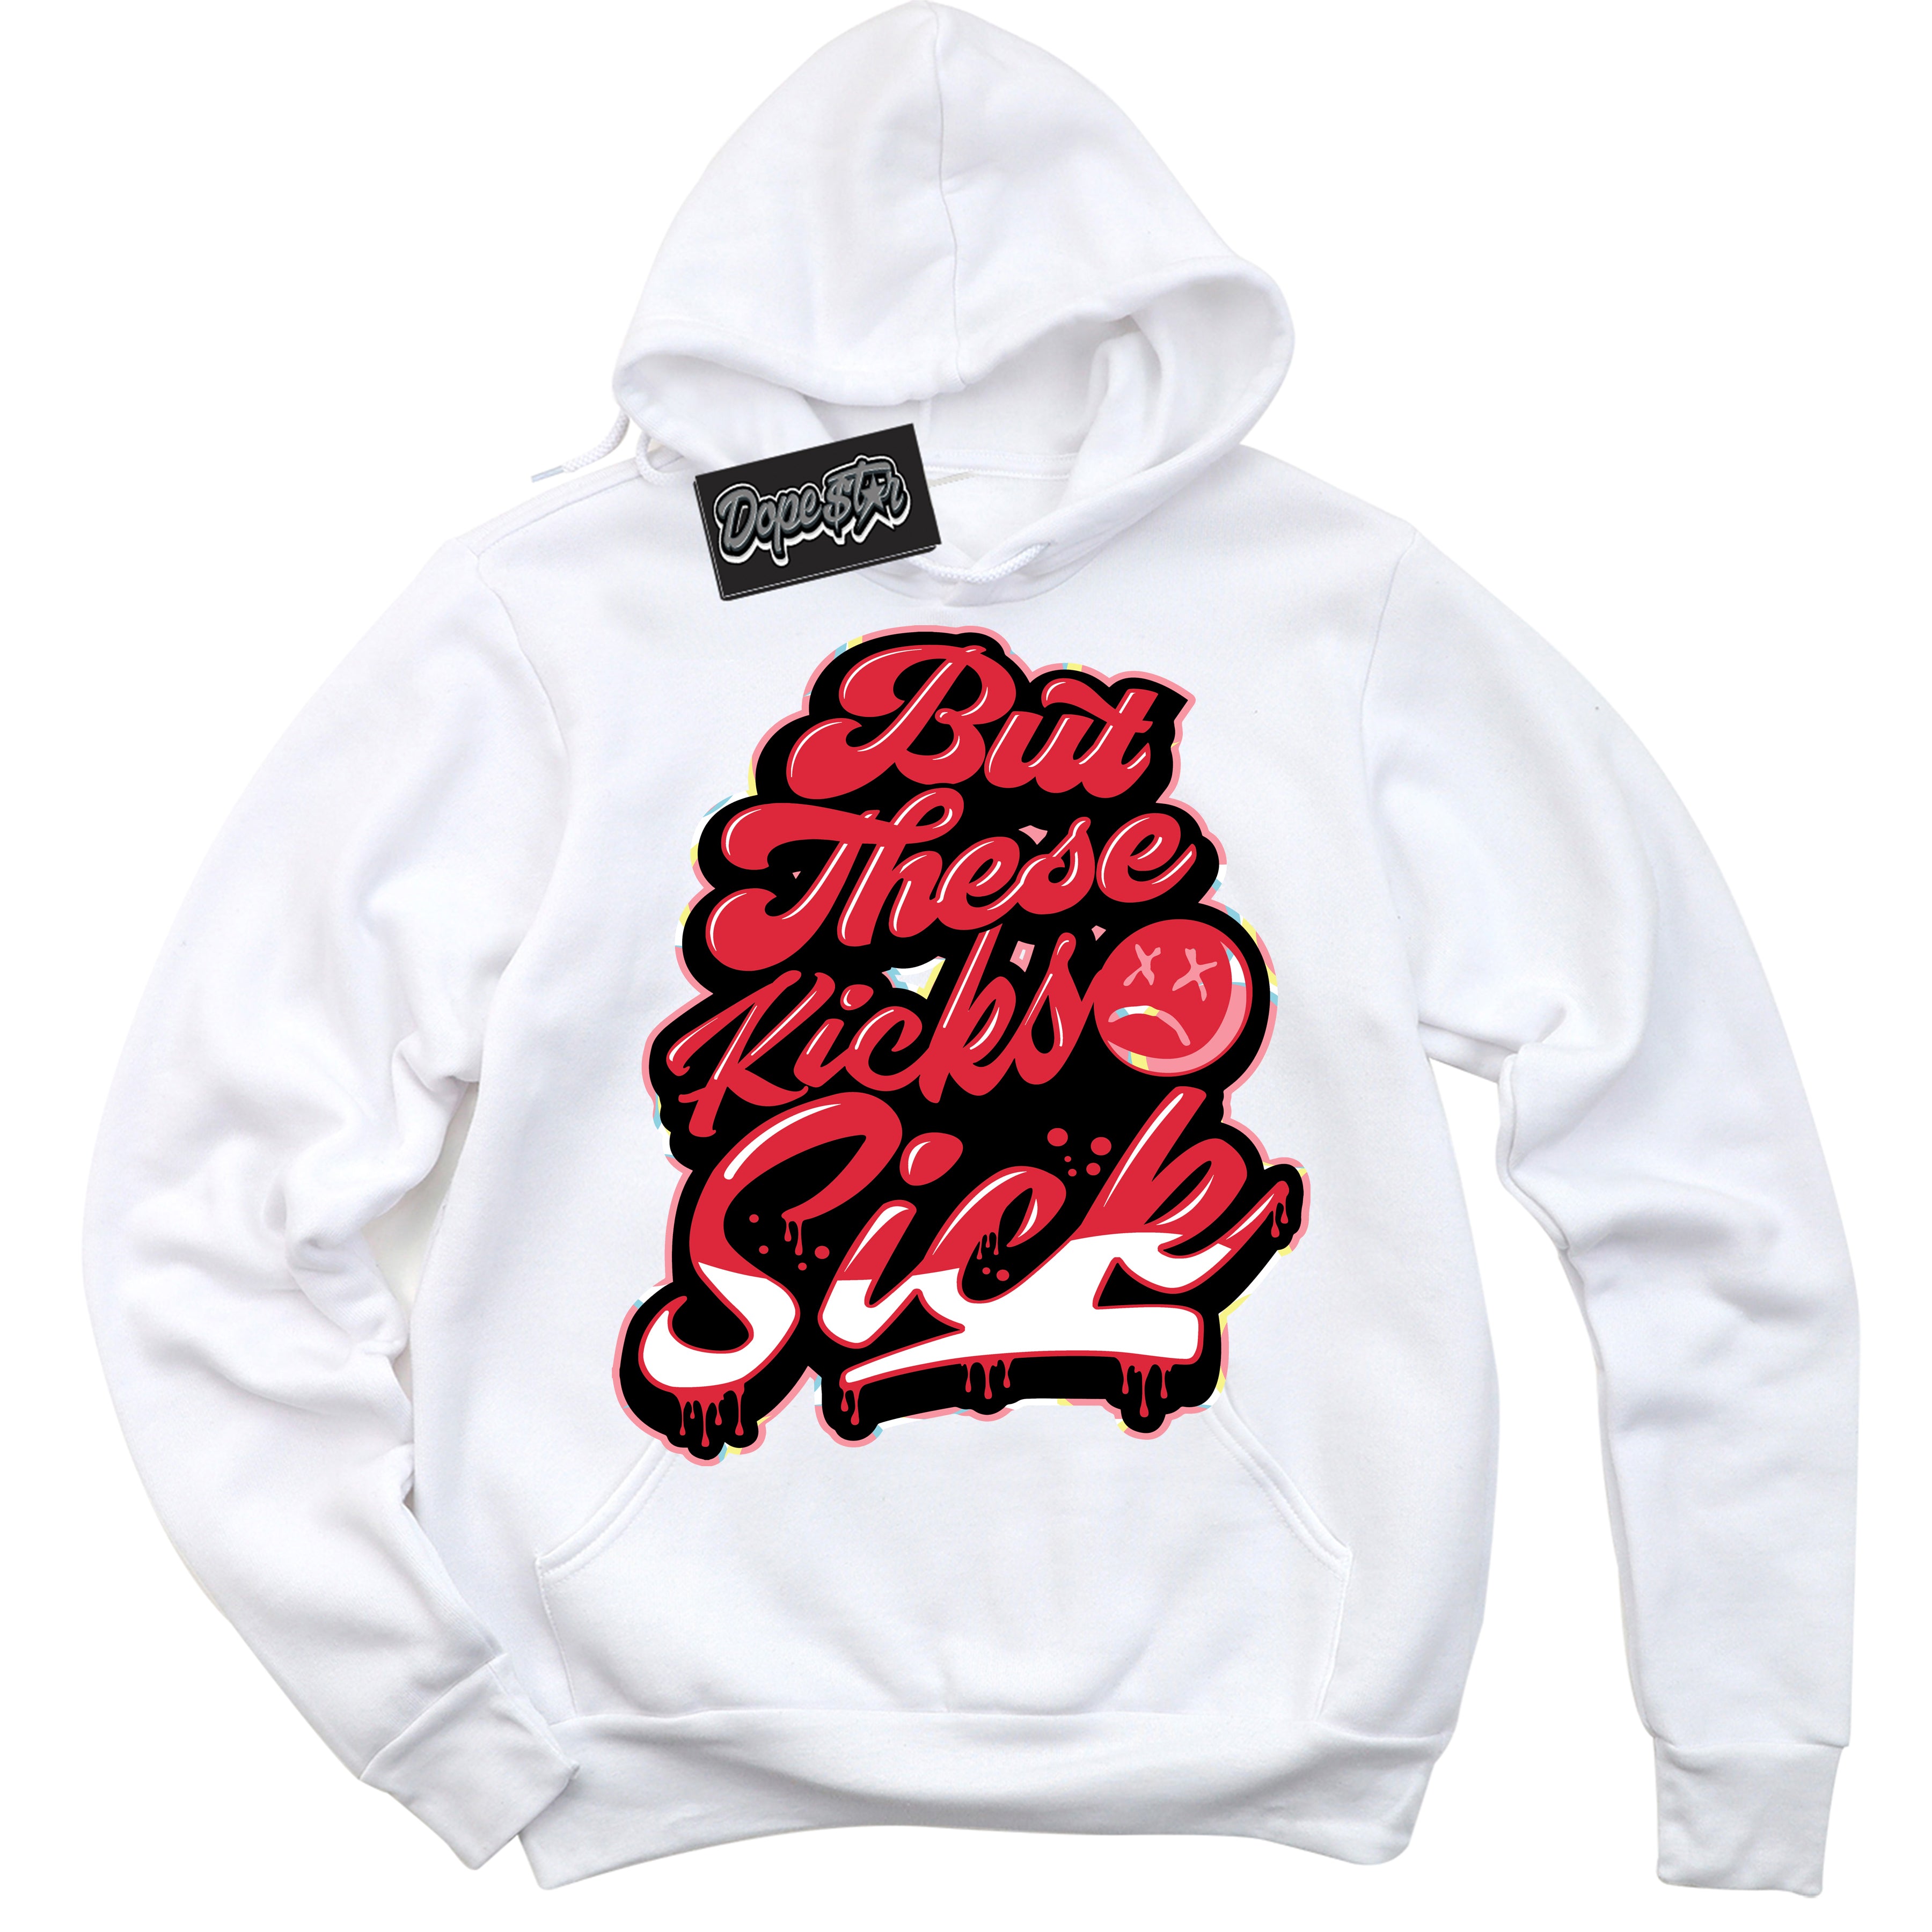 Cool White Graphic DopeStar Hoodie with “ Kick Sick “ print, that perfectly matches Spider-Verse 1s sneakers